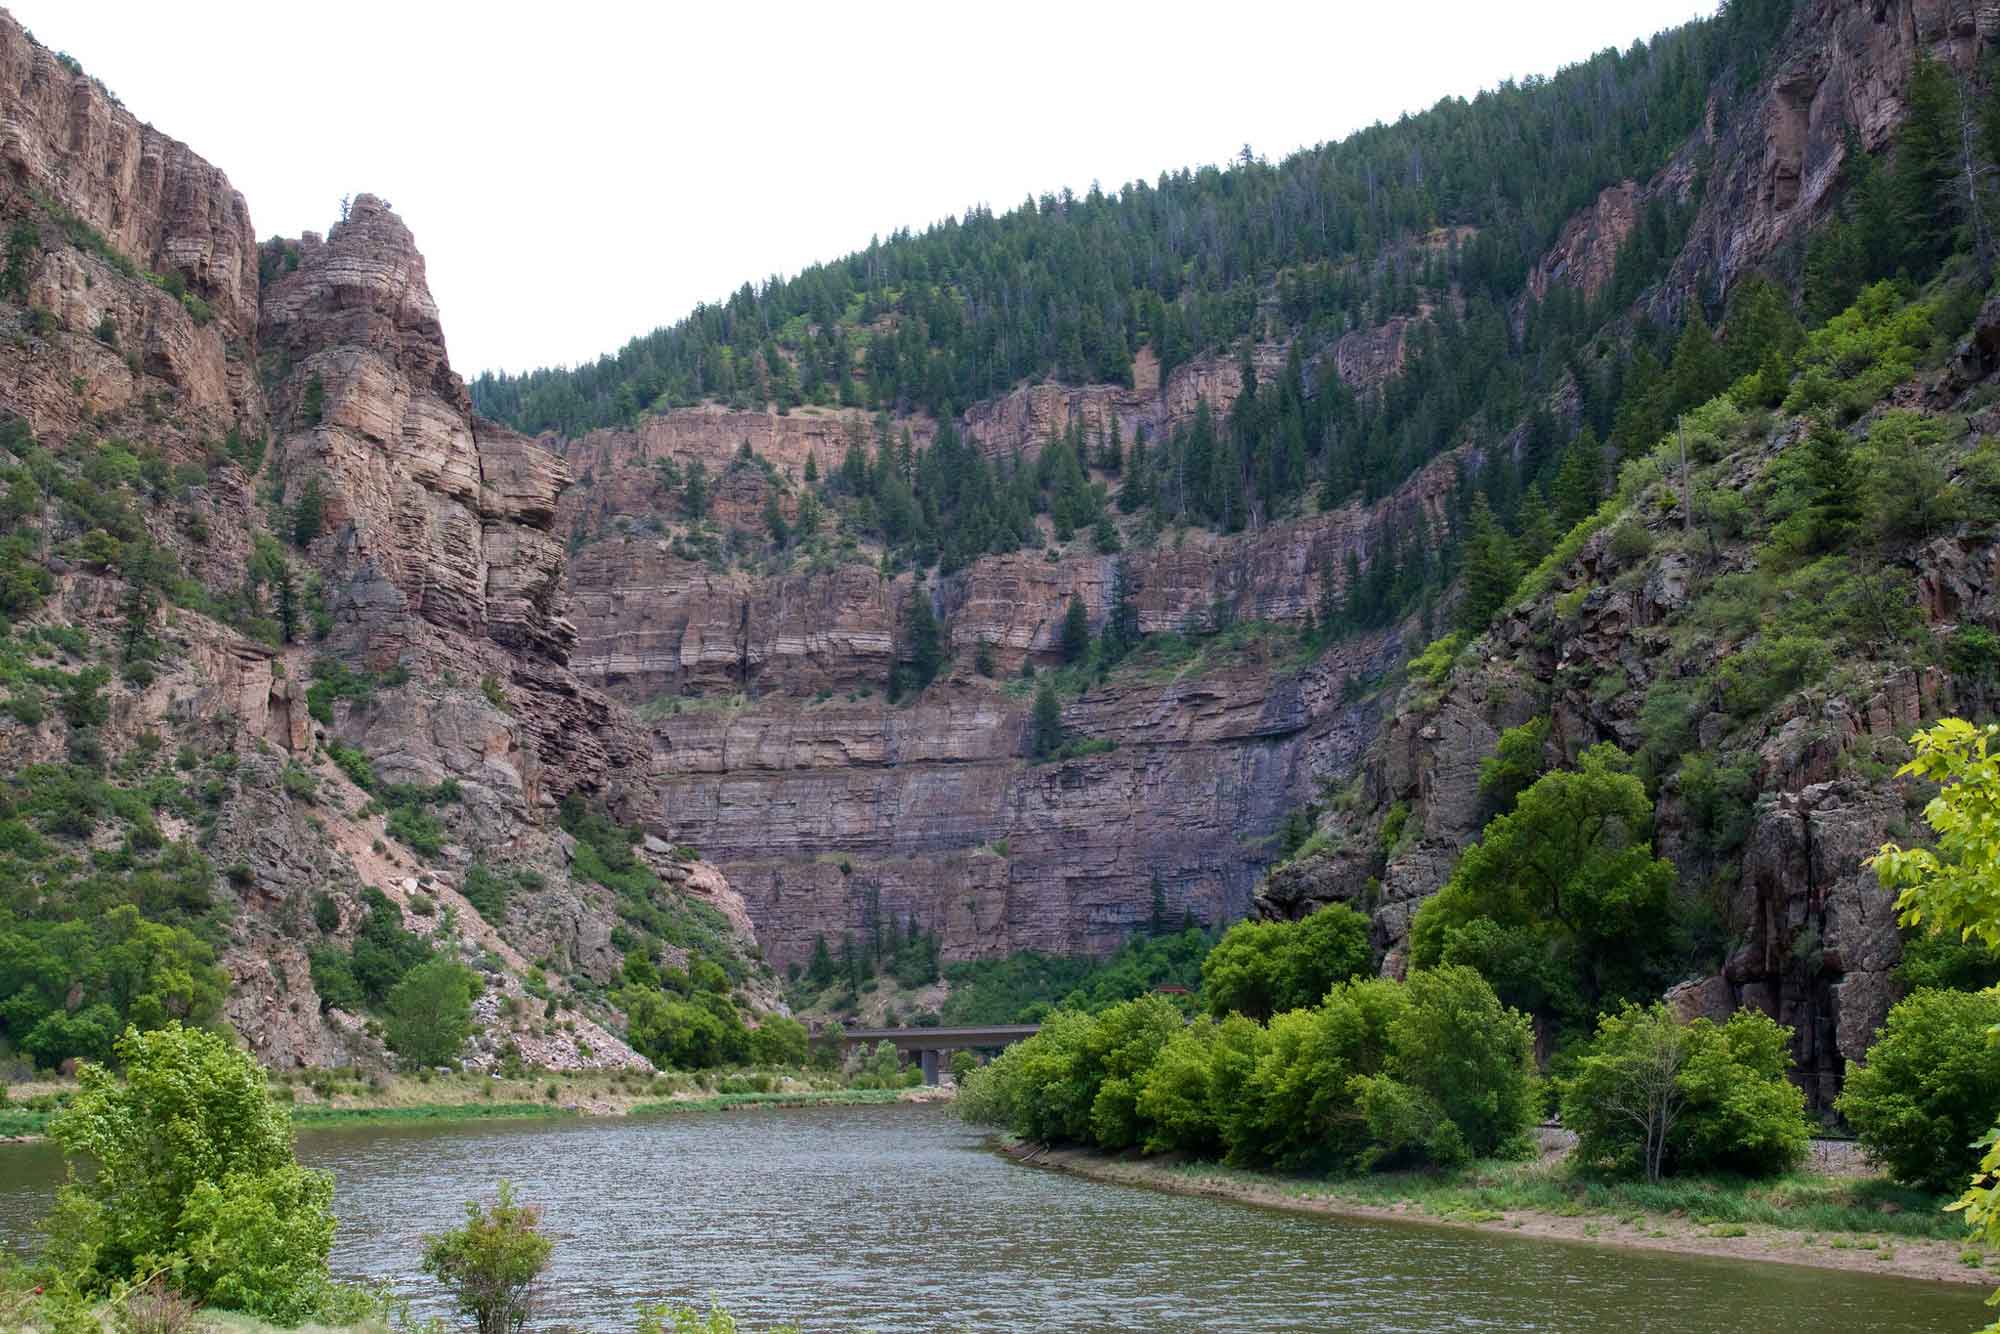 Photograph of Glenwood Canyon in Colorado.